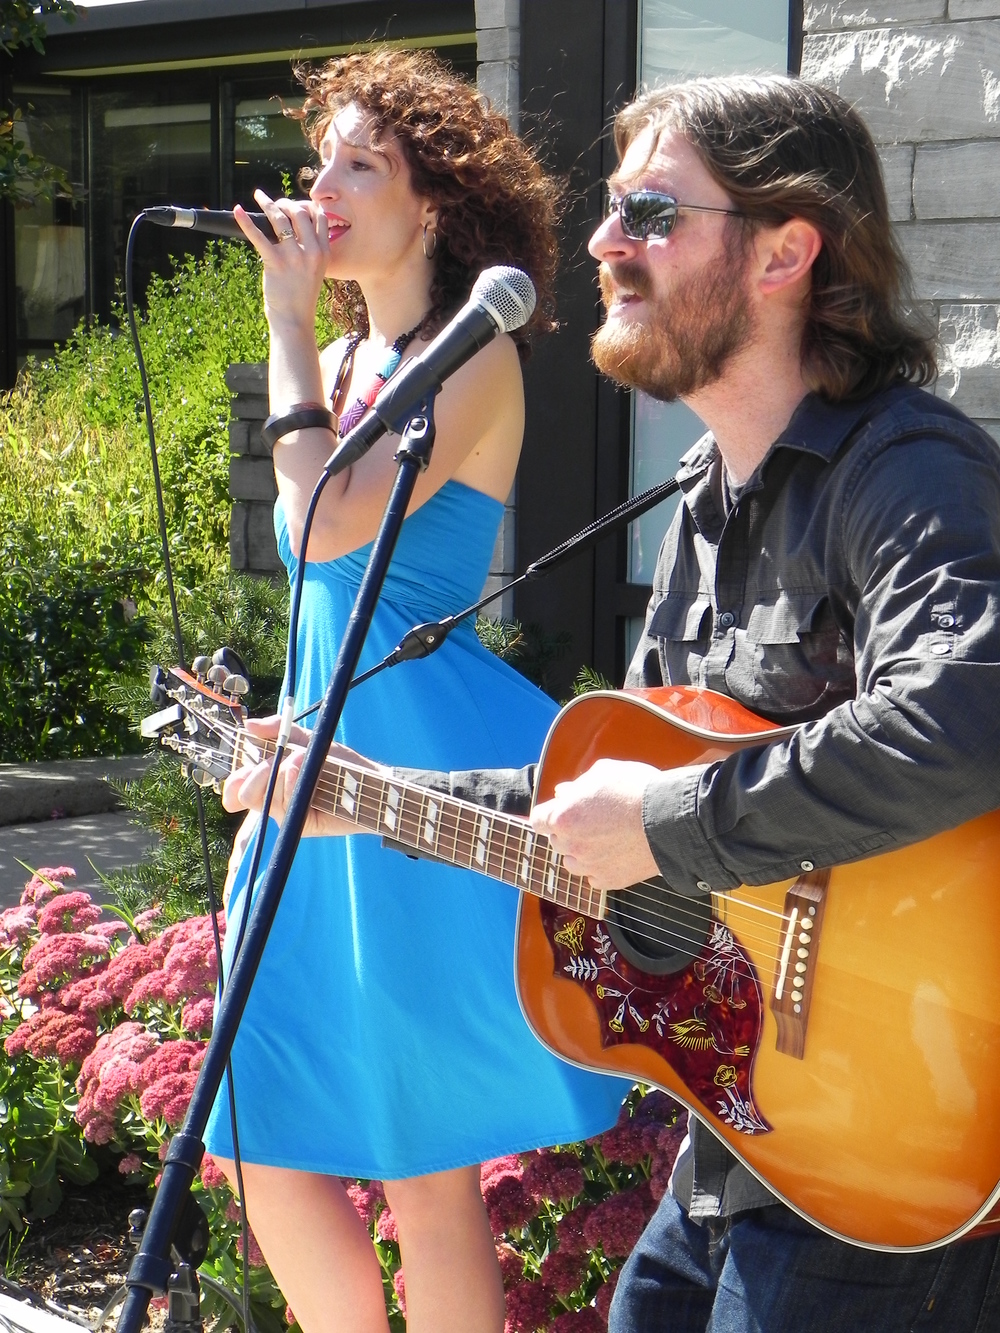 Heather Christine and Matt Zaddy Google image from https://www.modernmississauga.com/main/2016/6/9/modern-arts-river-north-mississaugas-masterful-musical-duo